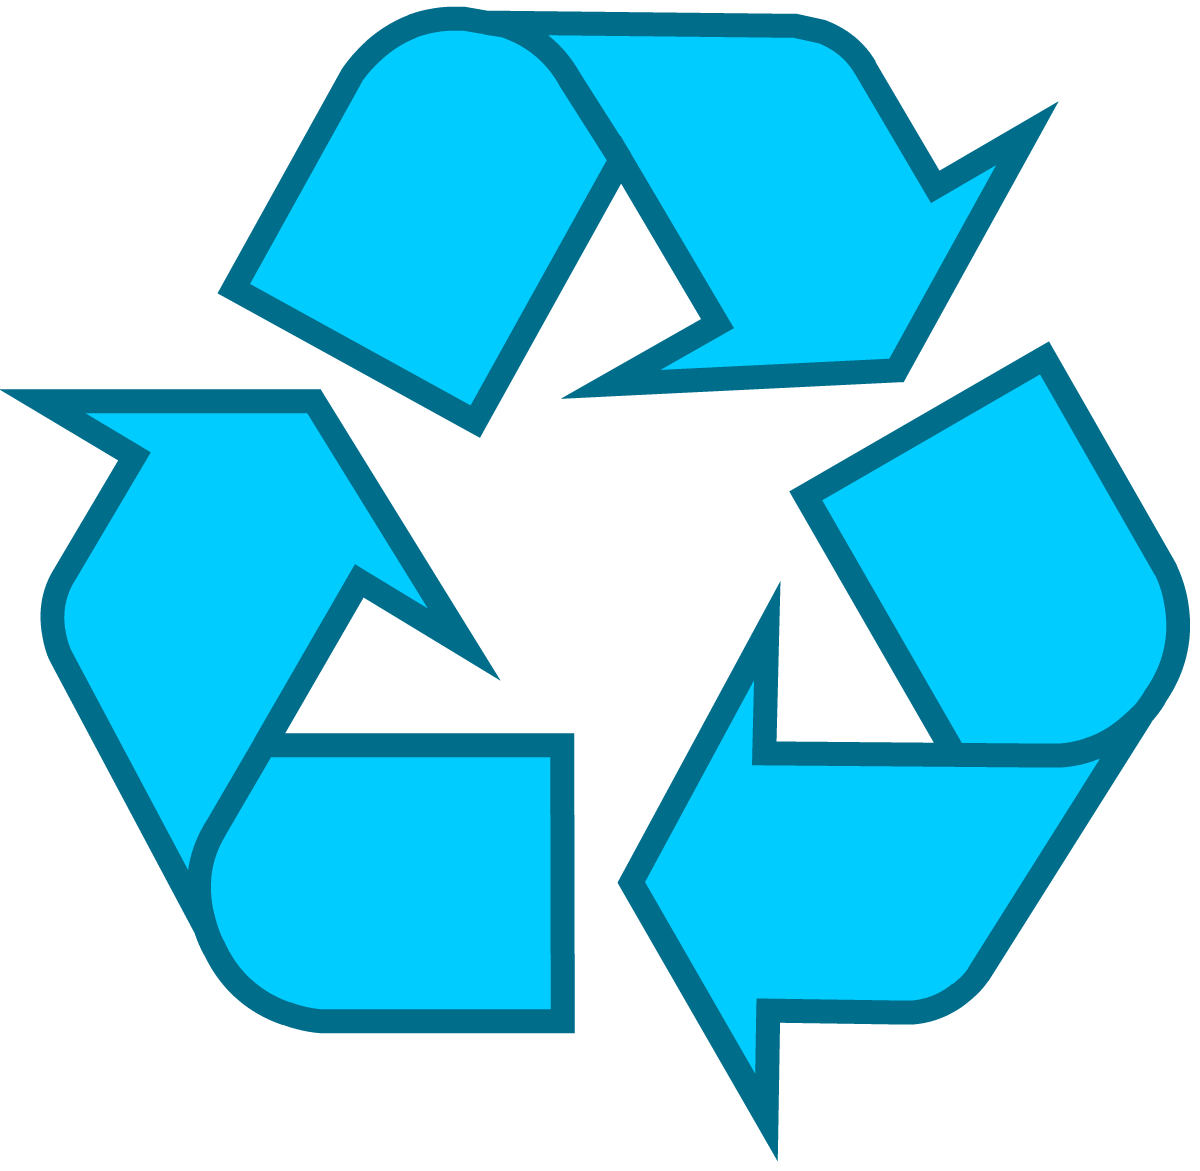 Light Blue Lime Green Logo - Recycling Symbol - Download the Original Recycle Logo